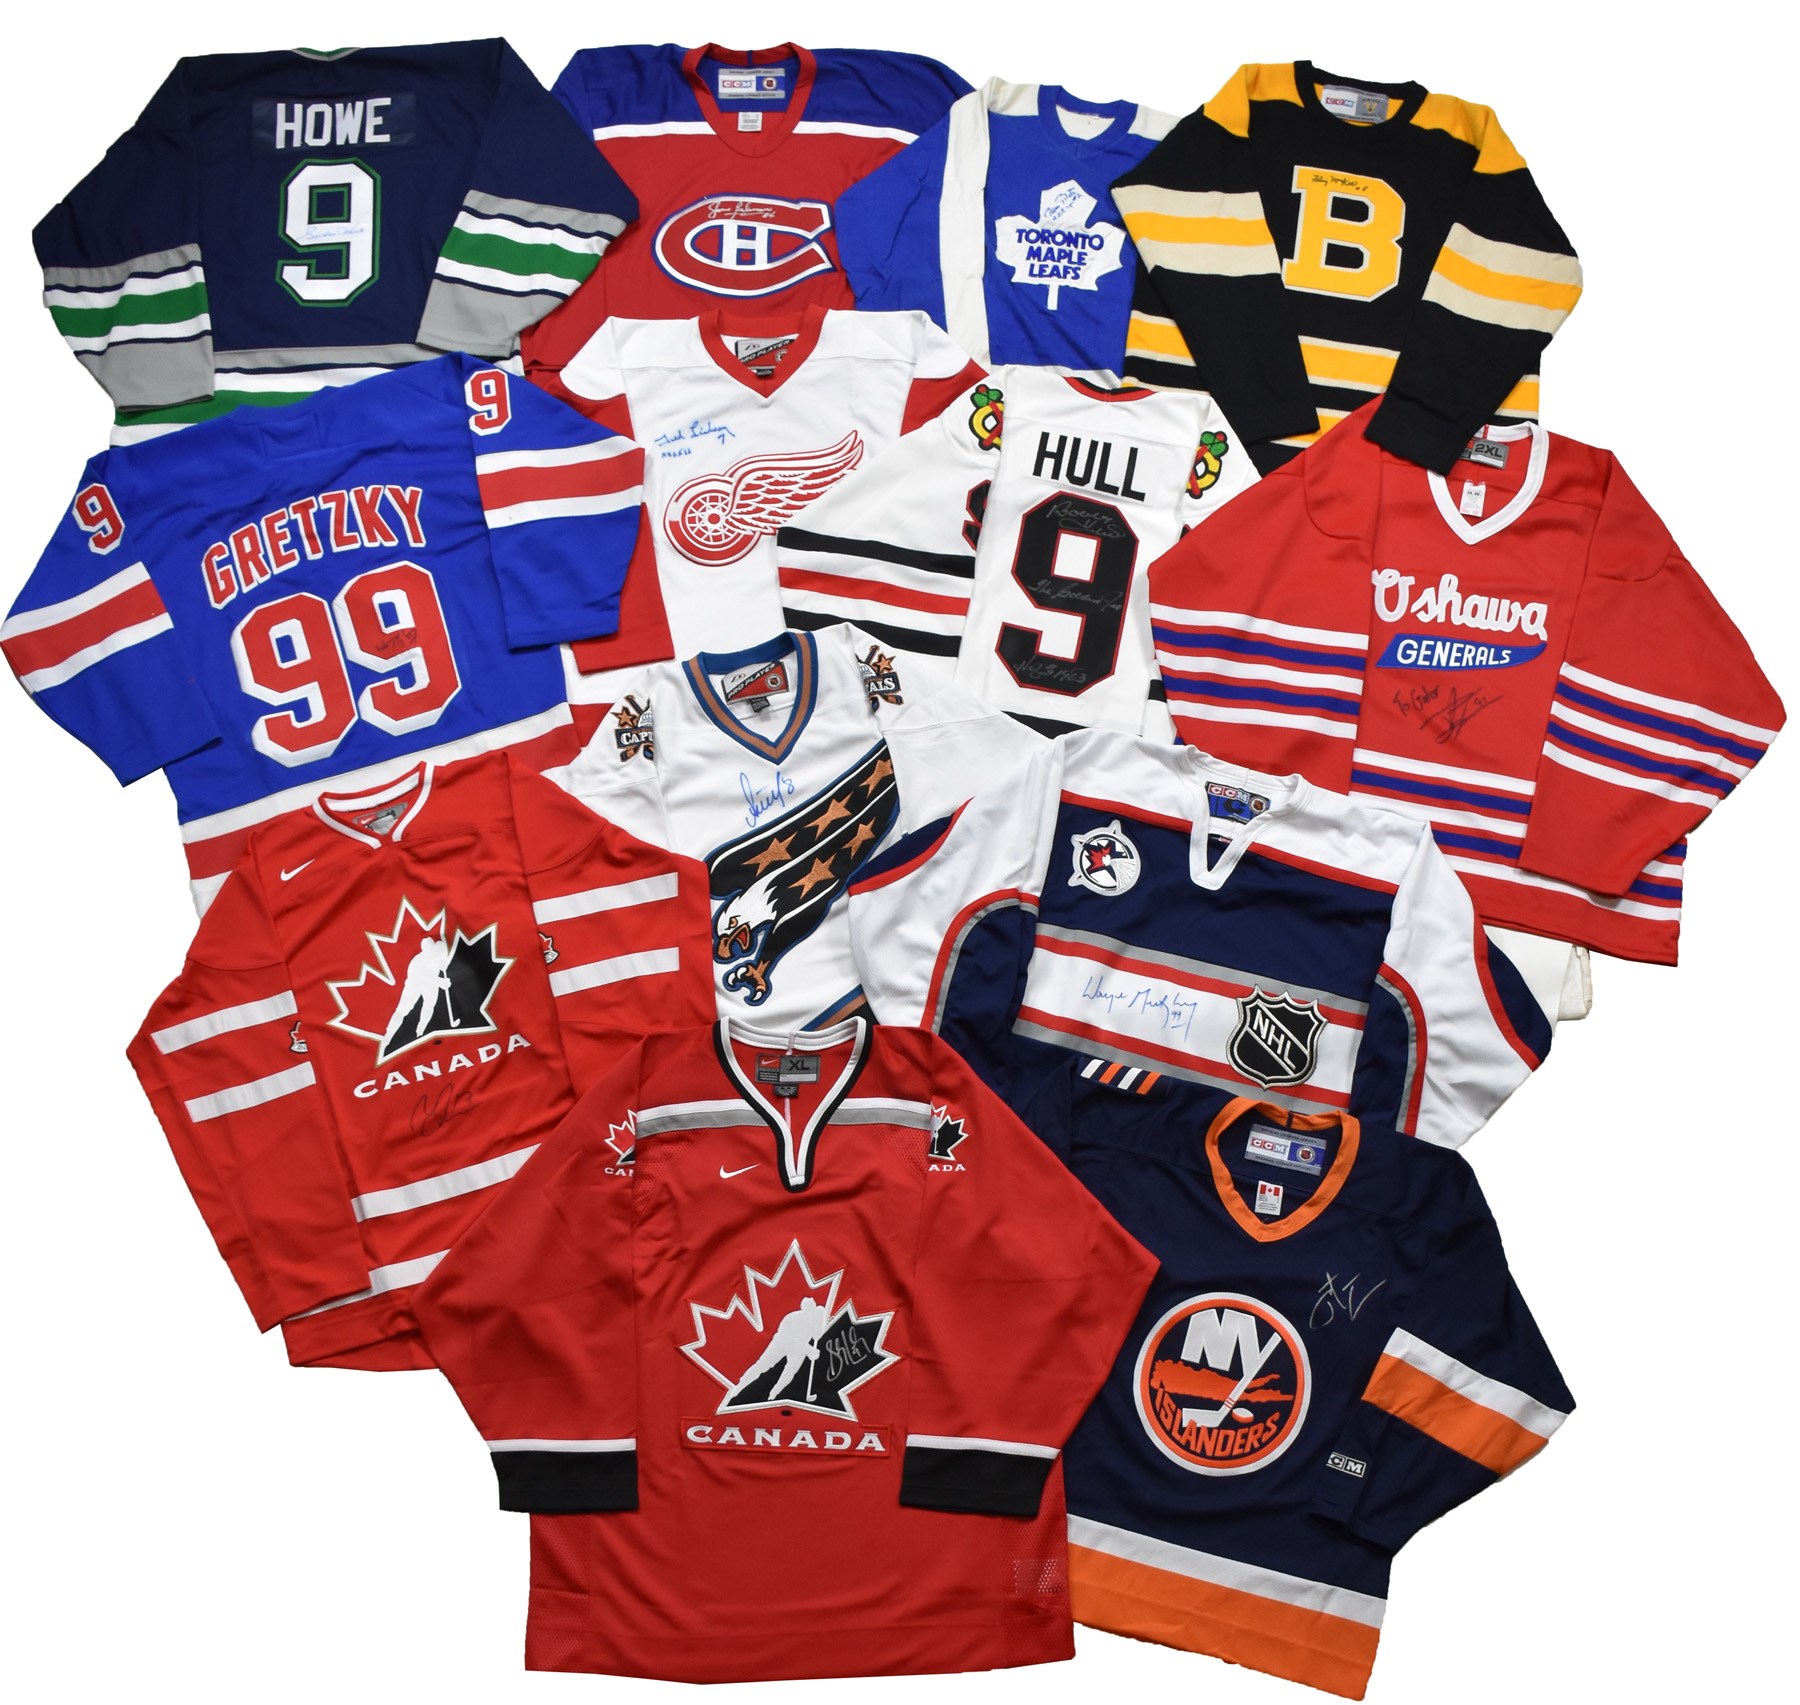 - Enormous Hockey Signed Jersey Collection with All-Time Legends - Gretzky, Howe, Crosby, McDavid, Ovechkin, Beliveau (250+)